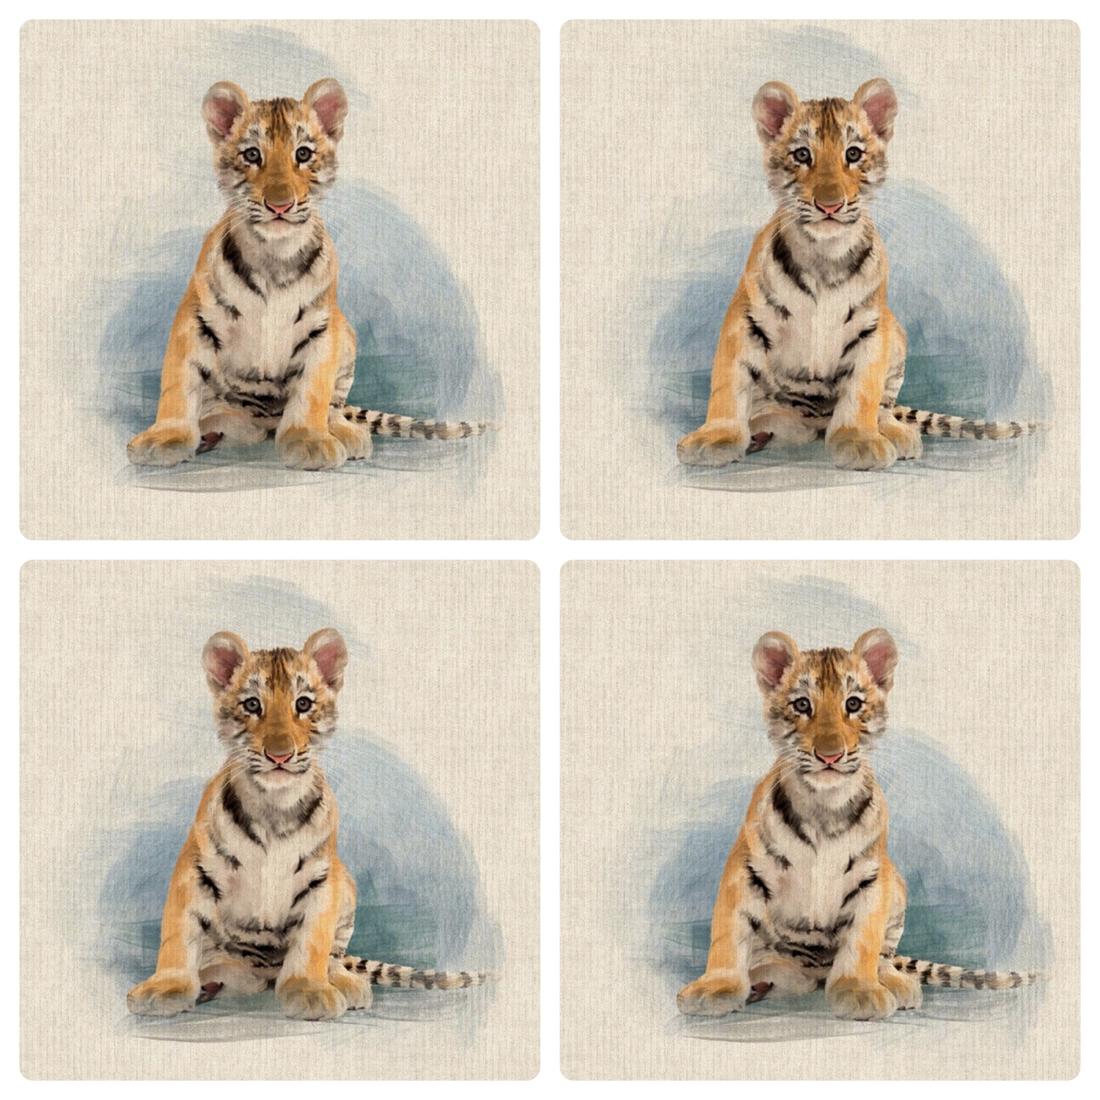 Special Offer! 4 Tiger Cubs Cushion Panels for £6